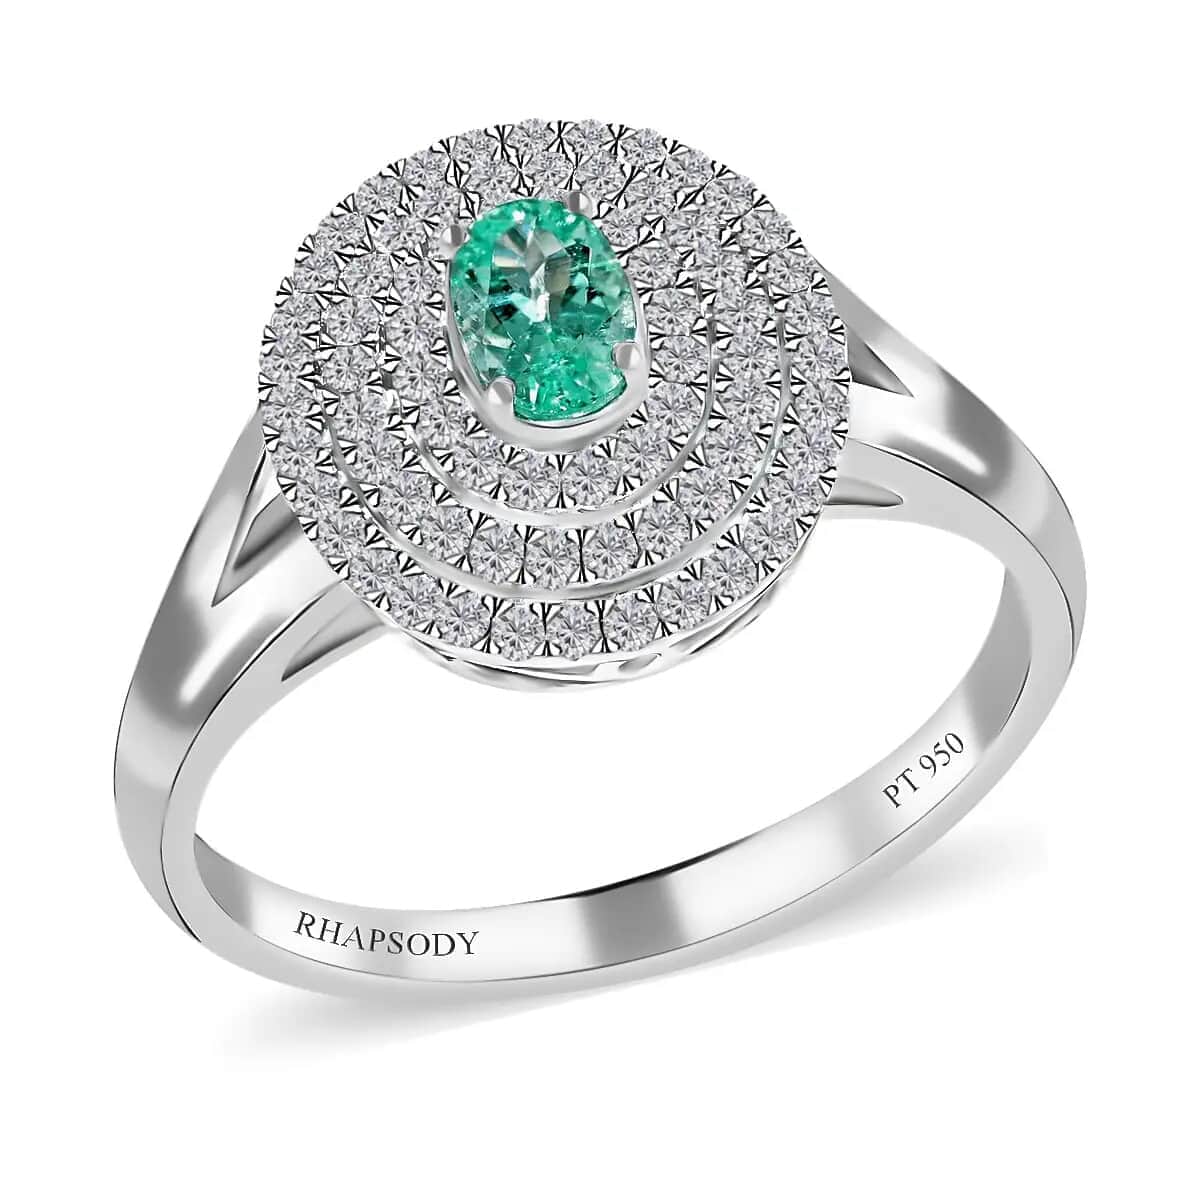 Certified Rhapsody 950 Platinum AAAA Paraiba Tourmaline Ring, Diamond Cocktail Ring, Wedding Rings For Women 1.00 ctw (Size 6) image number 0